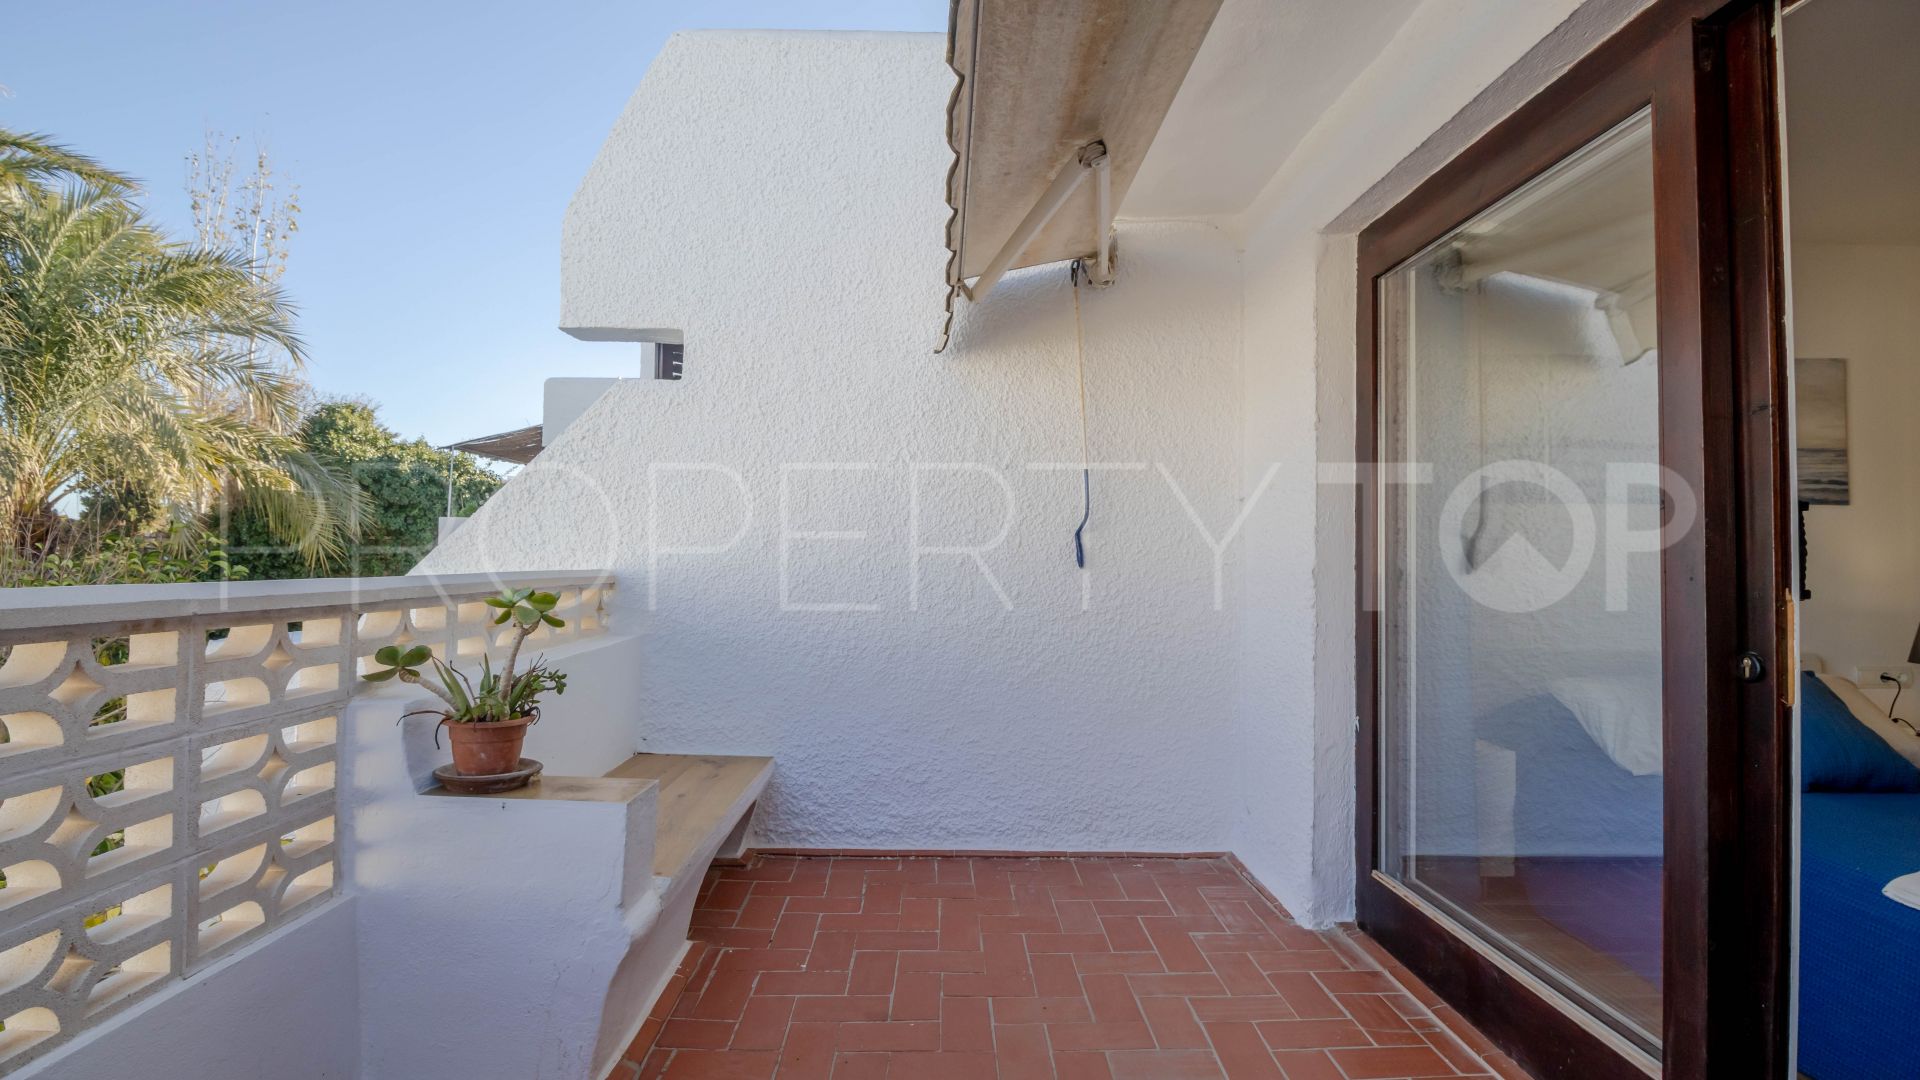 Apartment for sale in Siesta with 1 bedroom